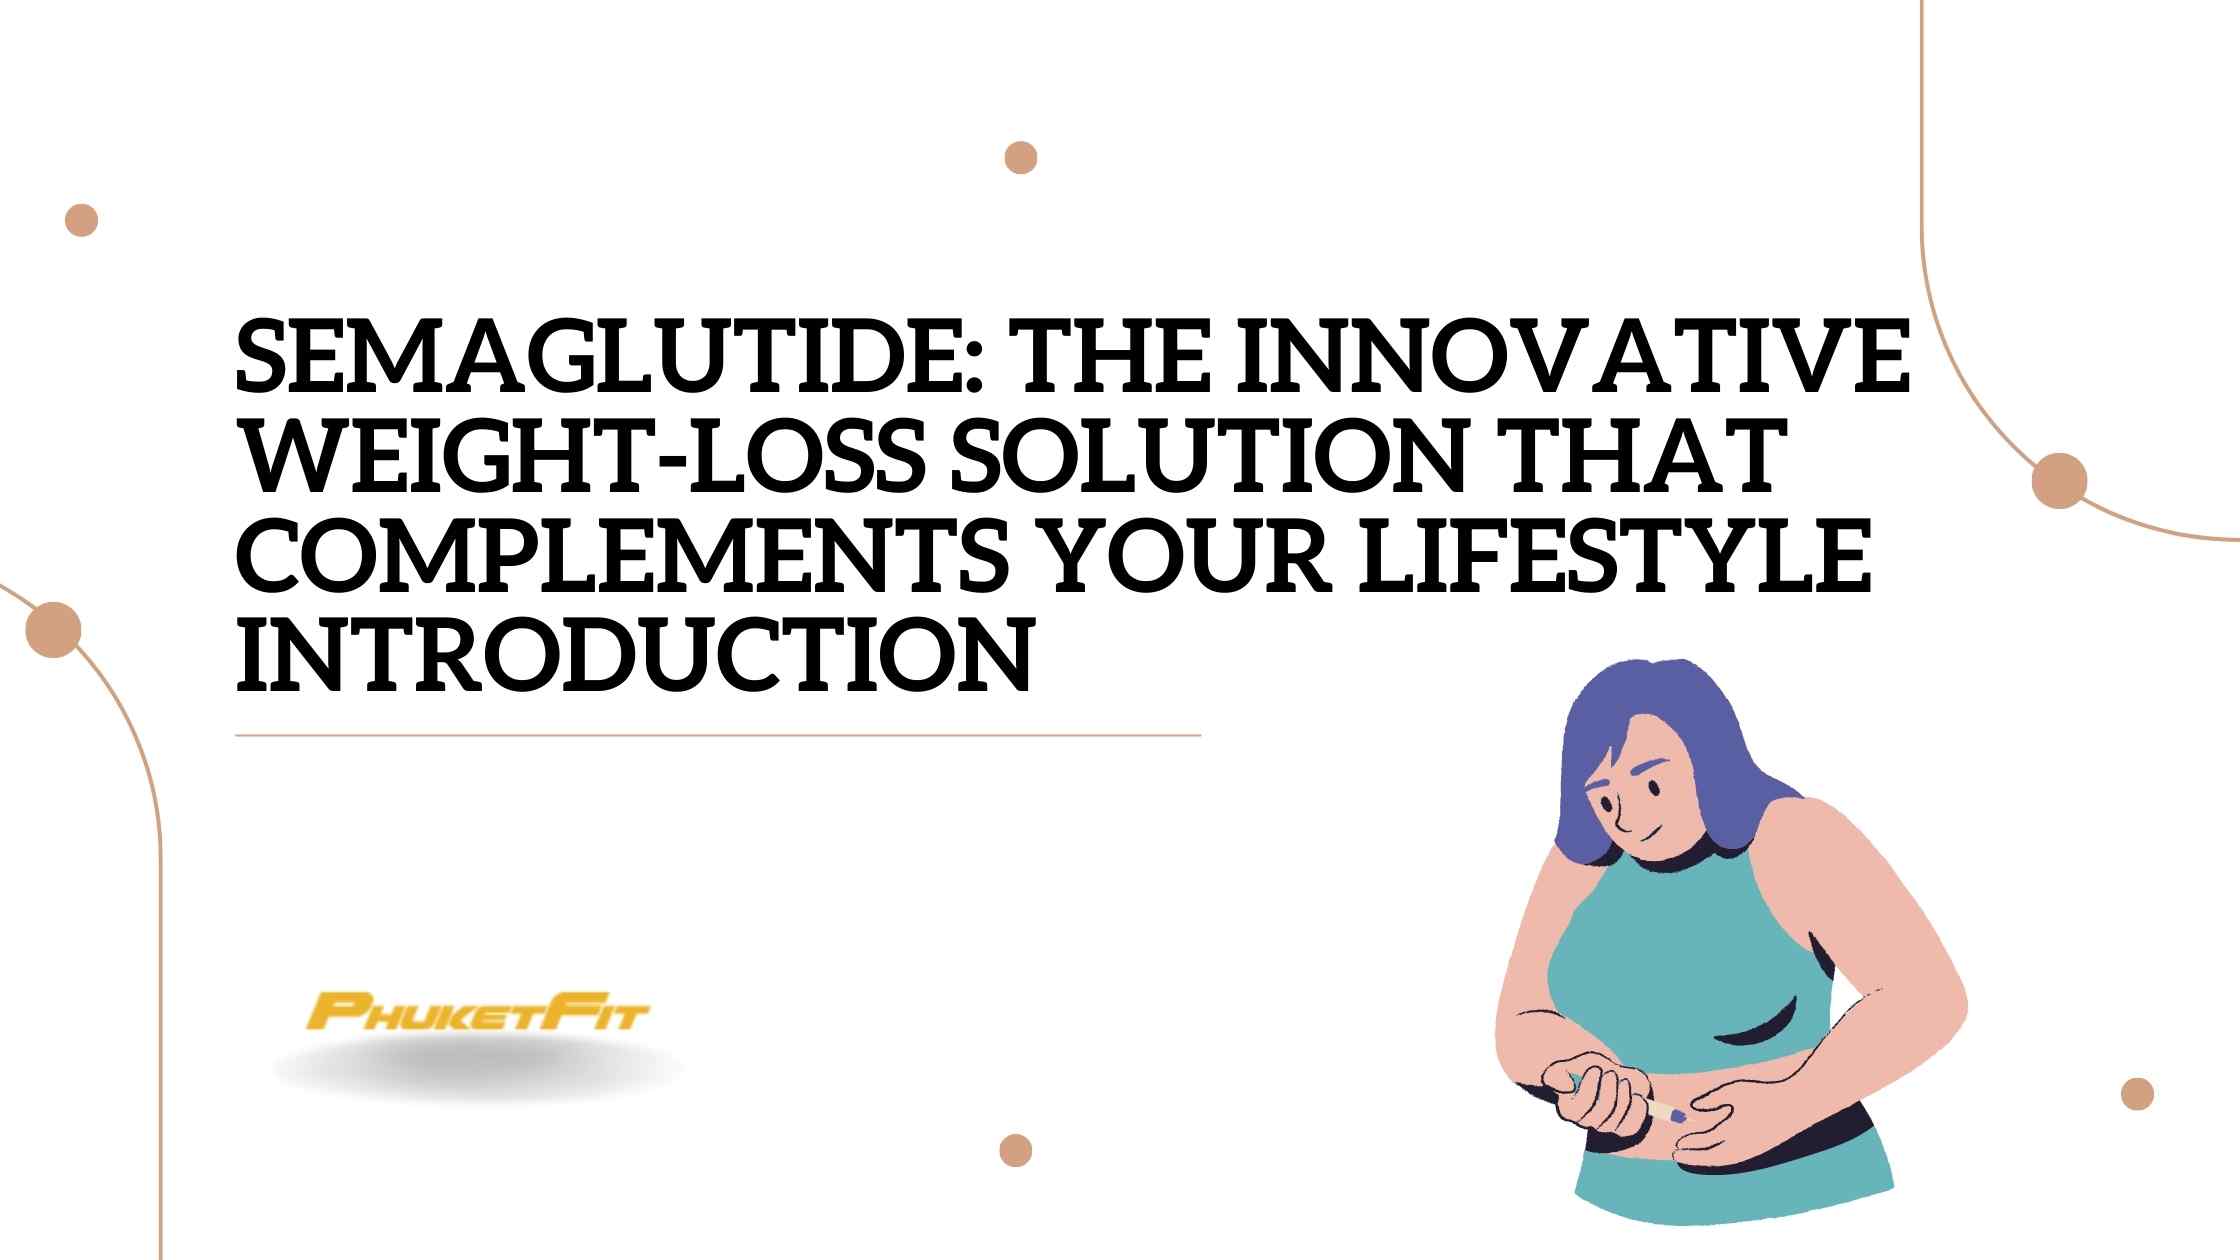 Semaglutide-The-Innovative-Weight-Loss-Solution-that-Complements-Your-Lifestyle-Introduction